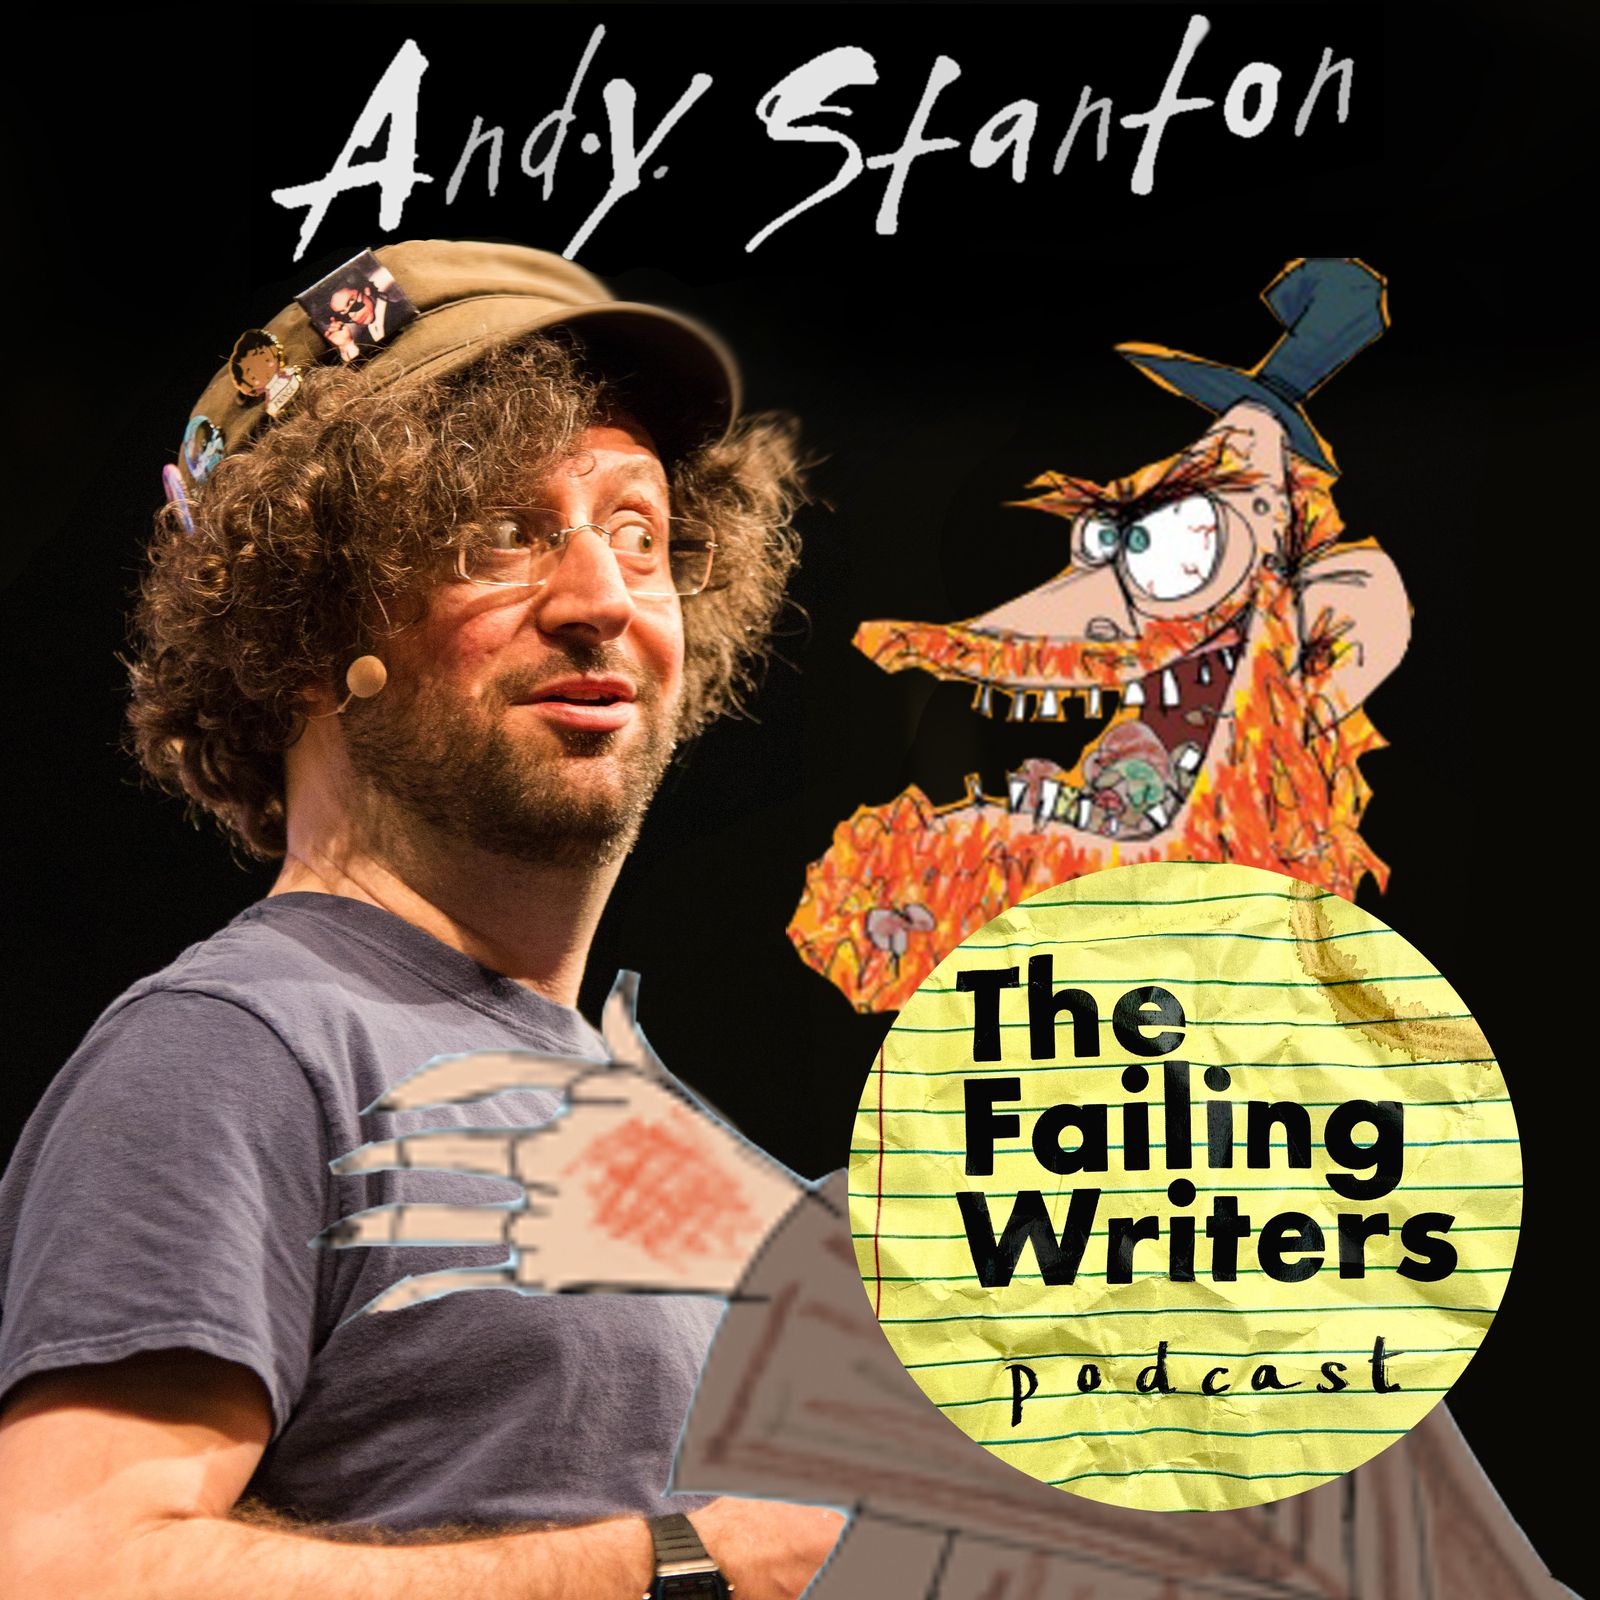 31: The greatest day of Jon's life - an interview with Andy Stanton Image